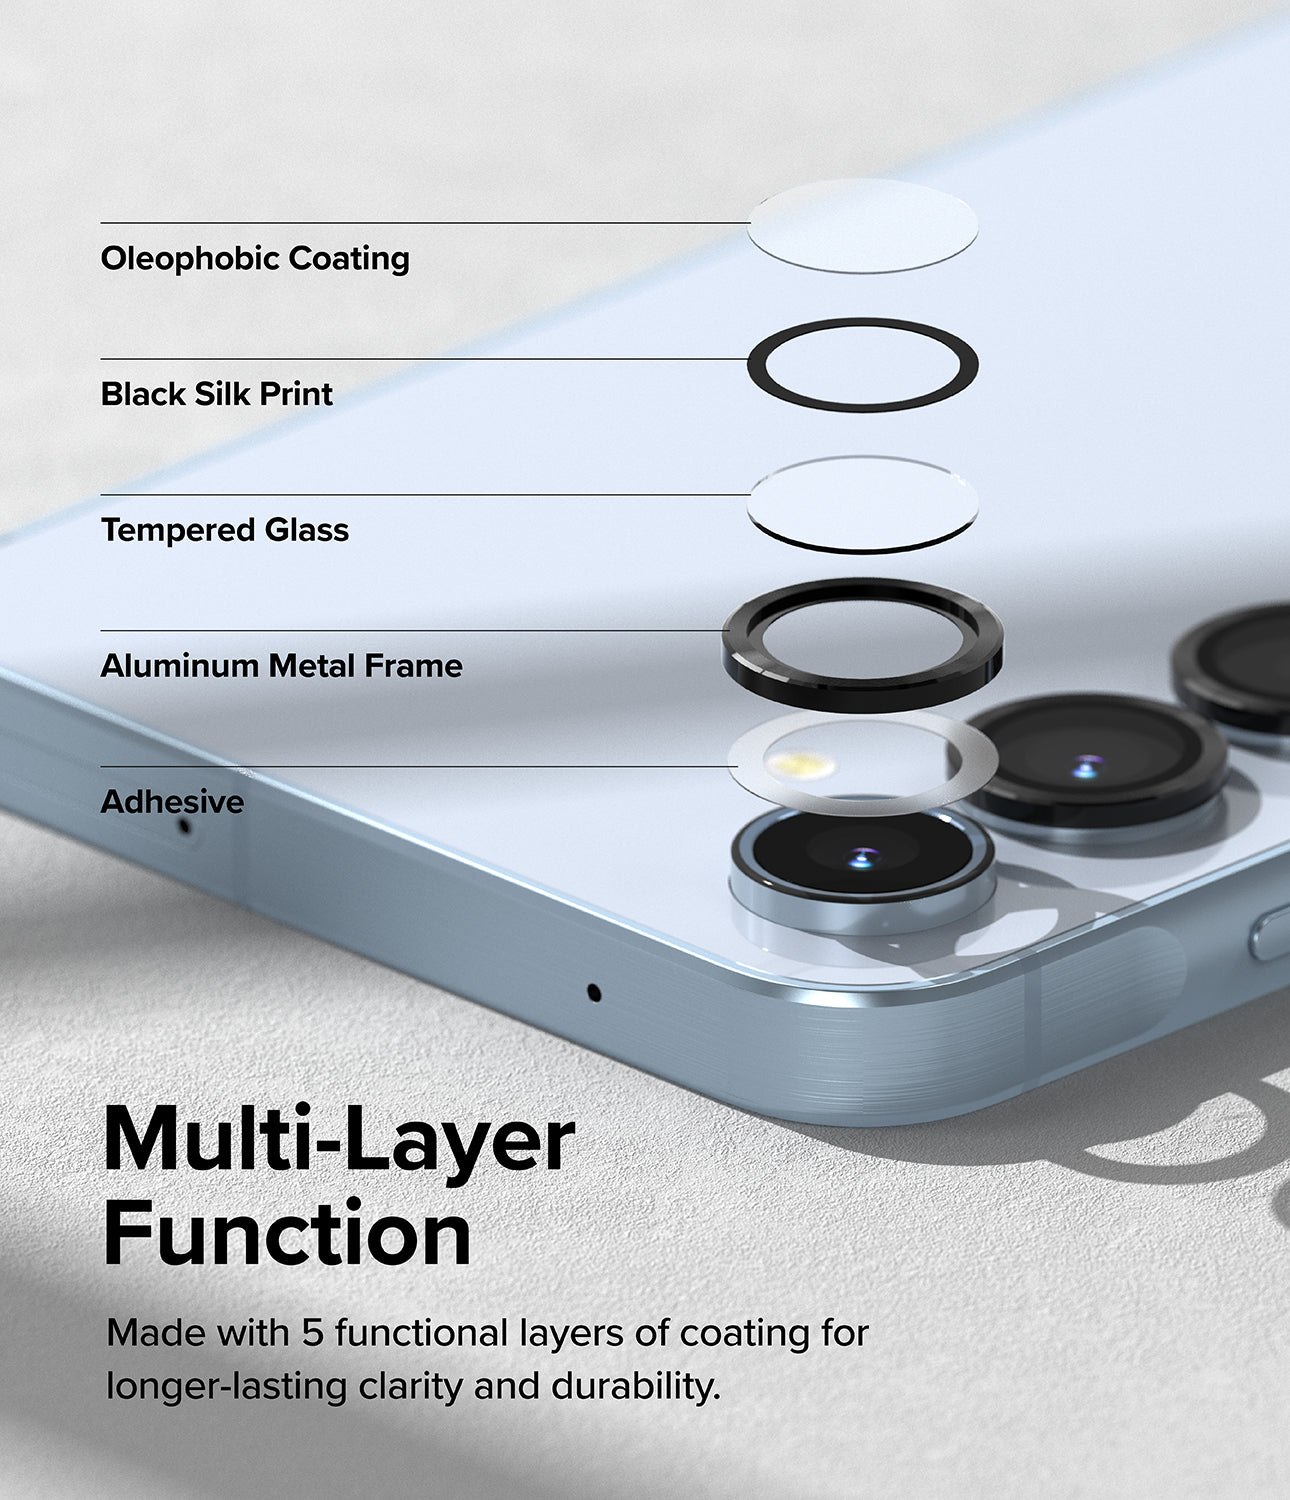 Galaxy A55 / A35 Camera Lens Frame Glass Protector - Multi-Layer Function. Made with 5 functional layers of coating for longer-lasting clarity and durability